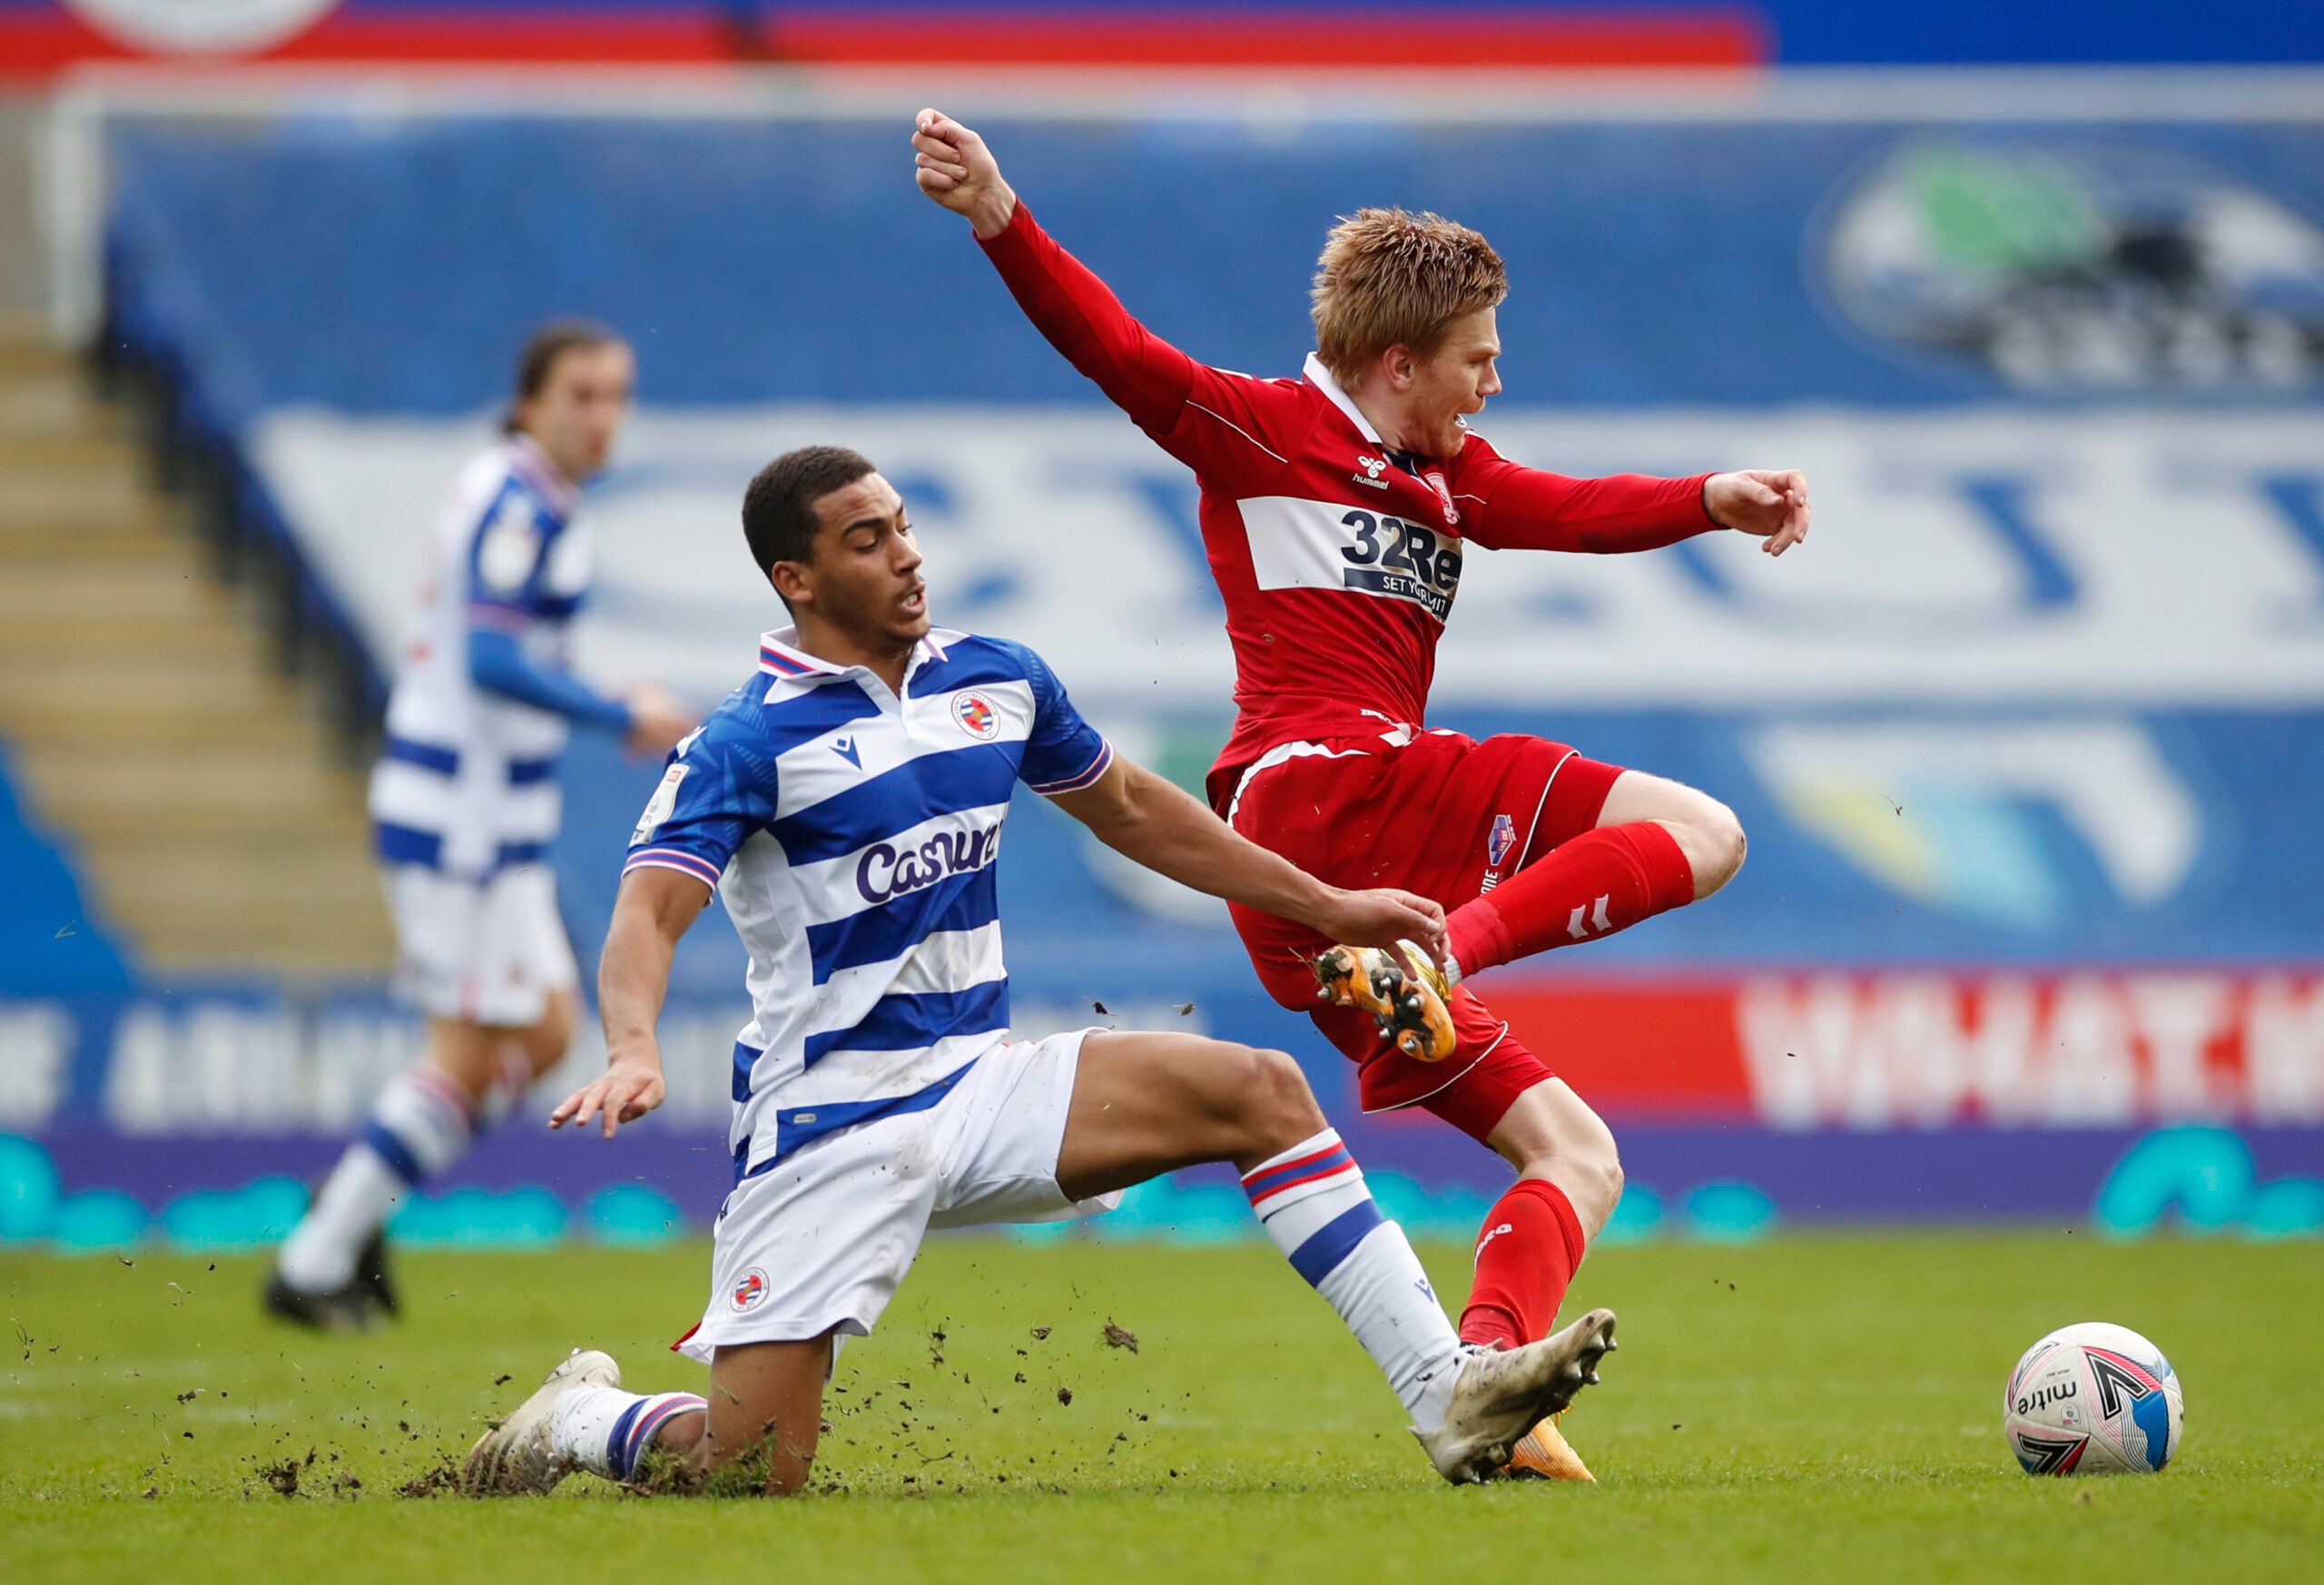 Soccer Football - Championship - Reading v Middlesbrough - Madejski Stadium, Reading, Britain - February 20, 2021 Reading's Andy Rinomhota in action with Middlesbrough's Duncan Watmore Action Images/Paul Childs EDITORIAL USE ONLY. No use with unauthorized audio, video, data, fixture lists, club/league logos or 'live' services. Online in-match use limited to 75 images, no video emulation. No use in betting, games or single club /league/player publications.  Please contact your account representat